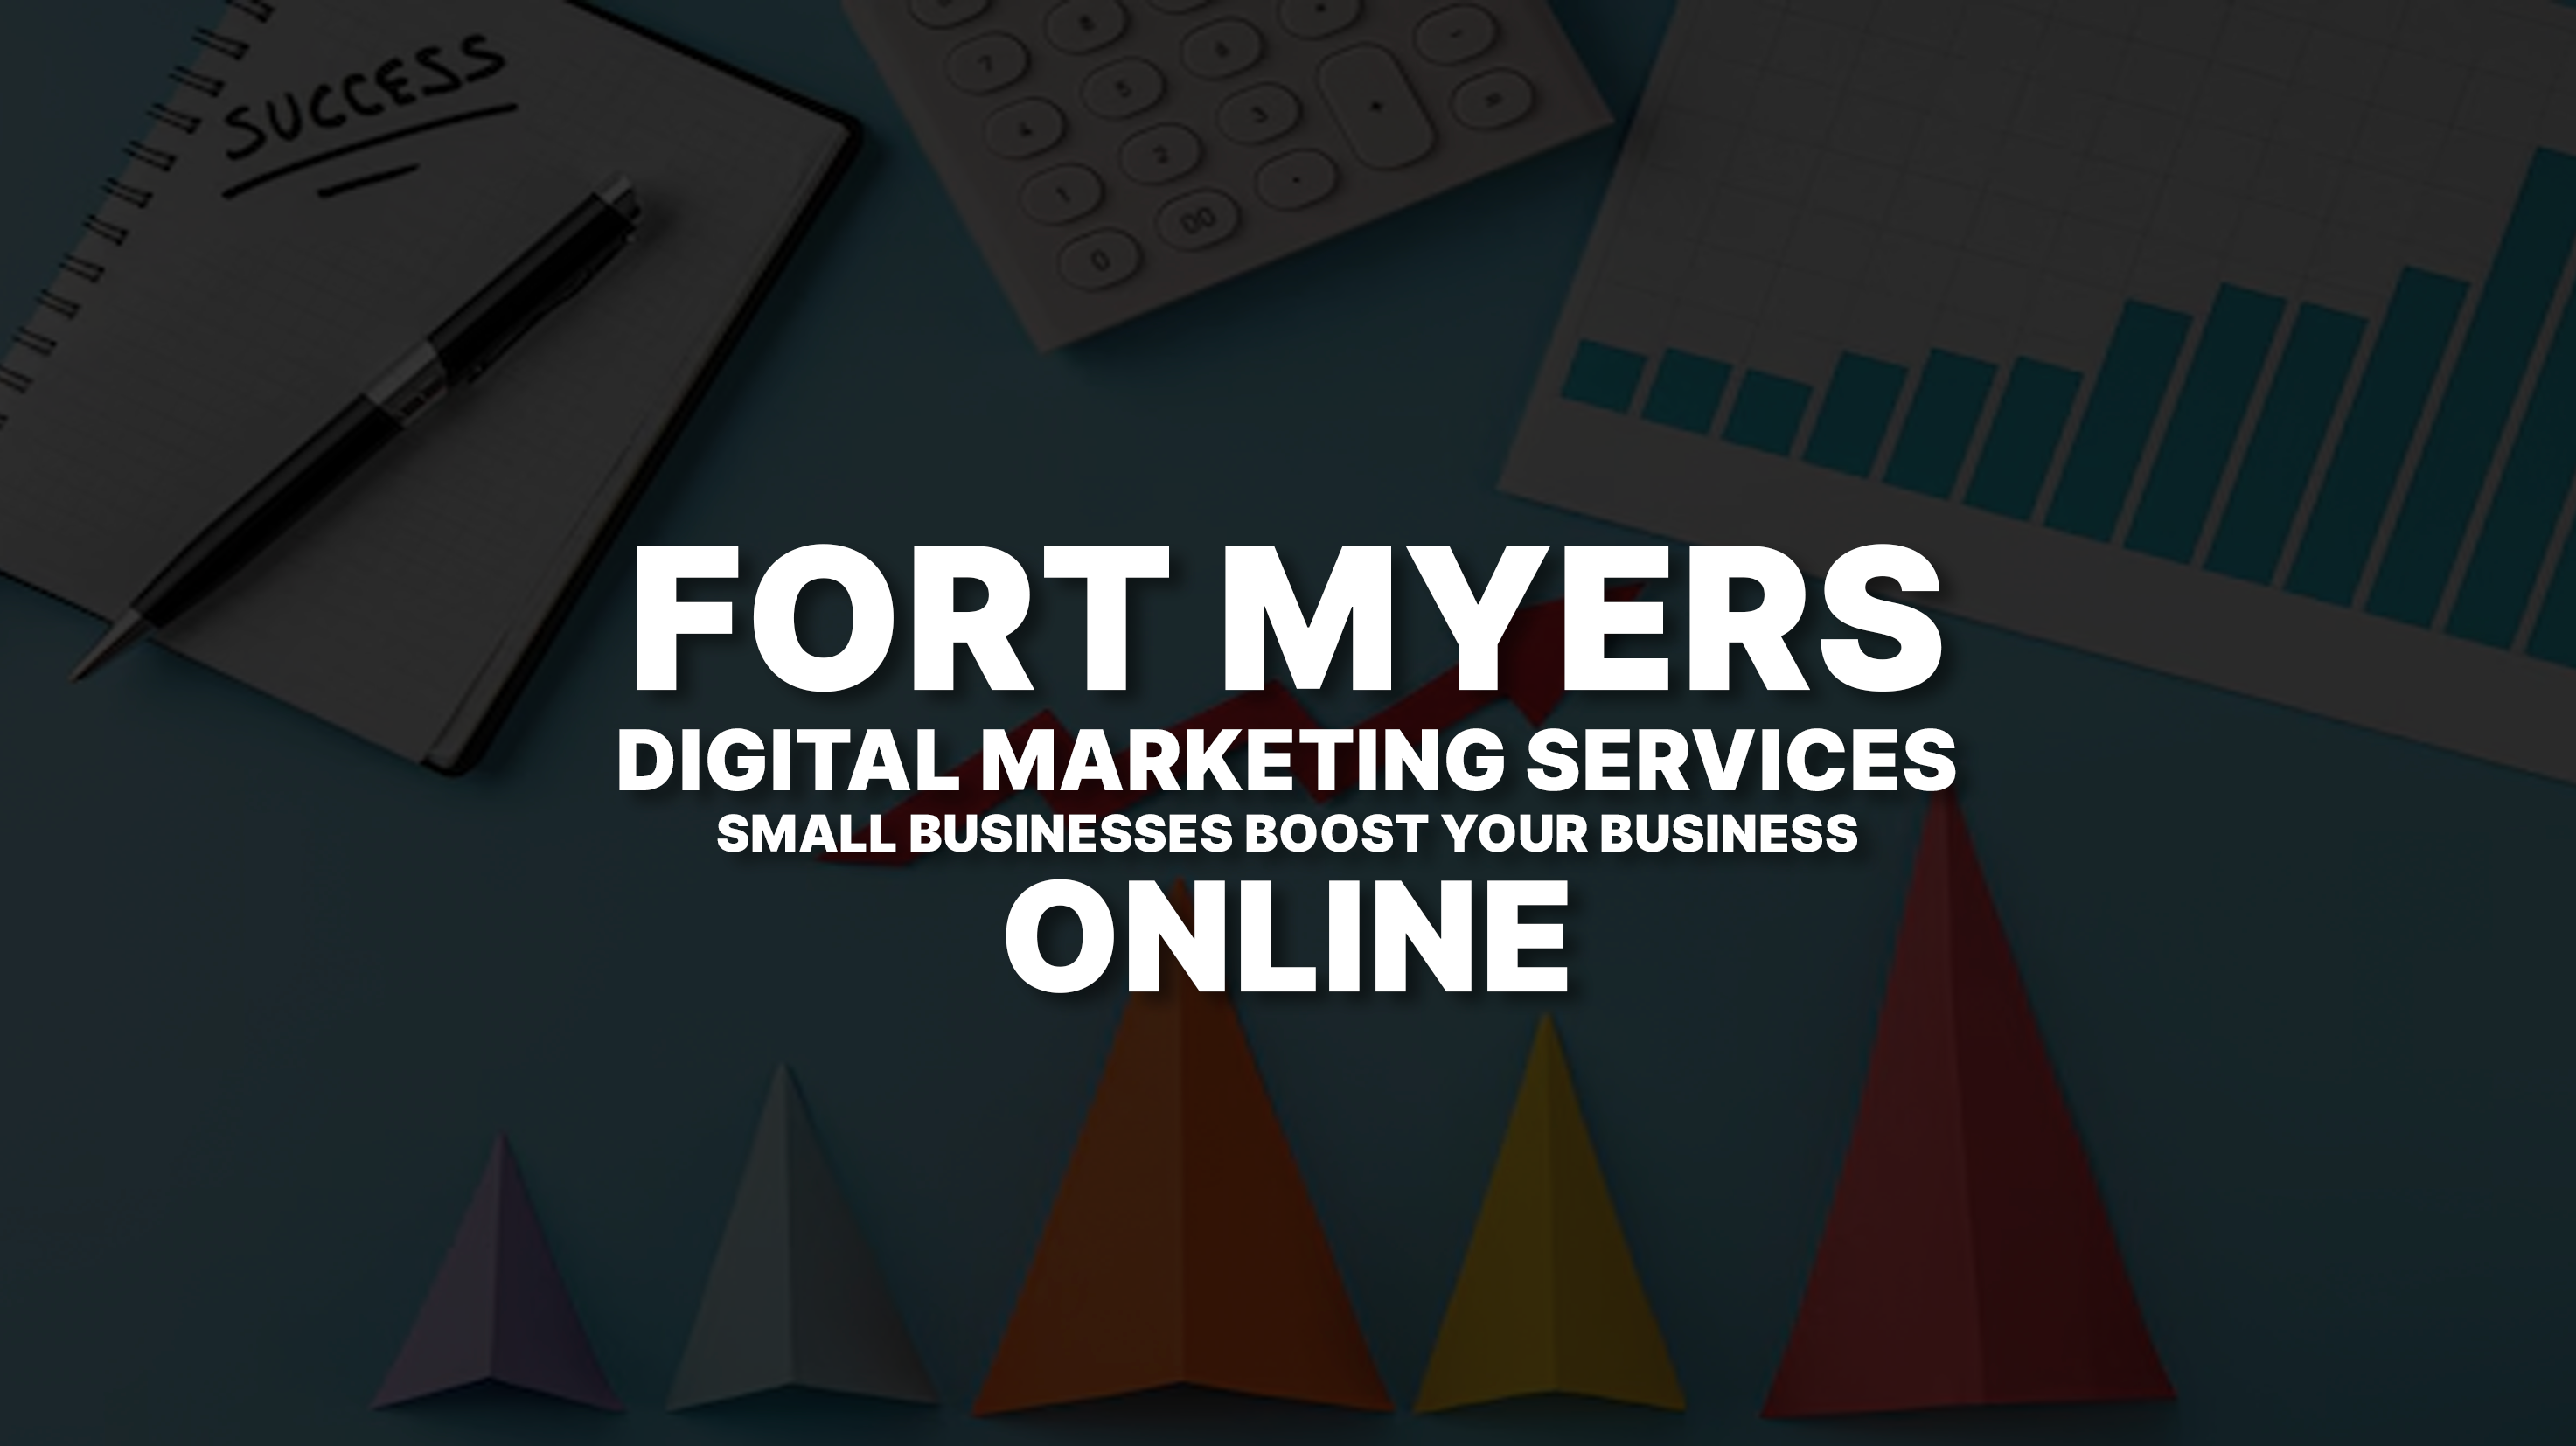 Fort Myers Digital Marketing Services